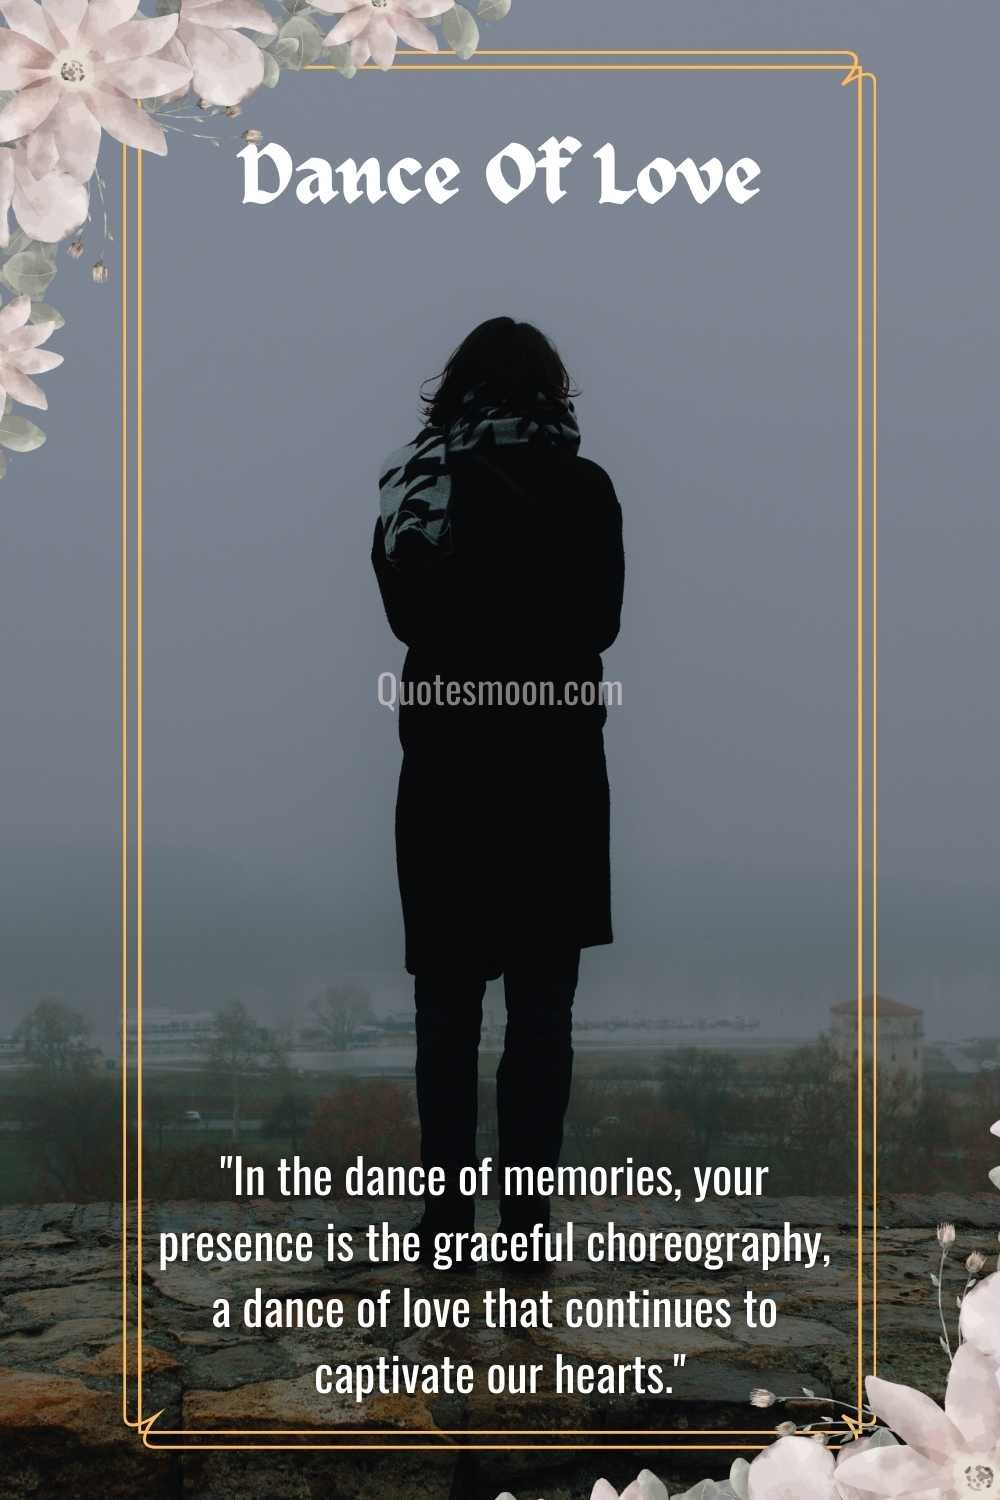 Inspiring Quotes for Husband’s Death Anniversary with images